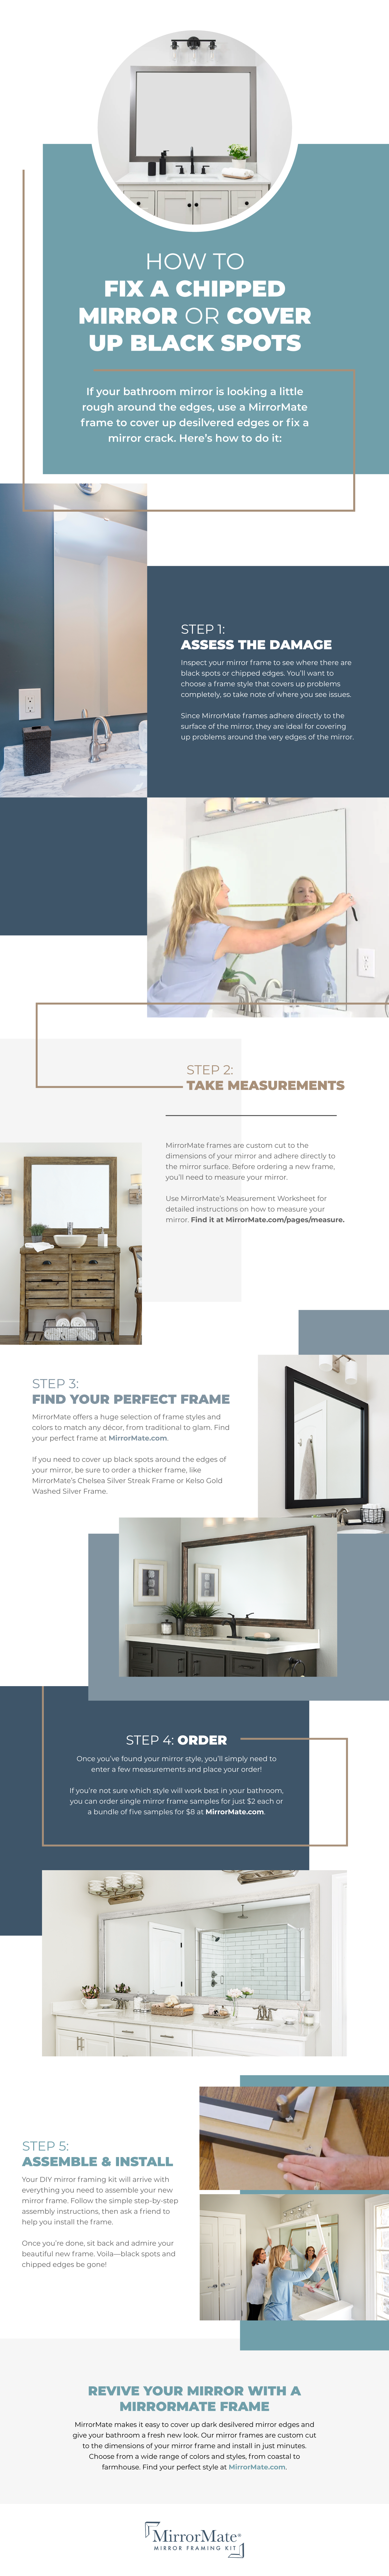 How to Fix a Chipped Mirror or Cover Up Black Spots Infographic